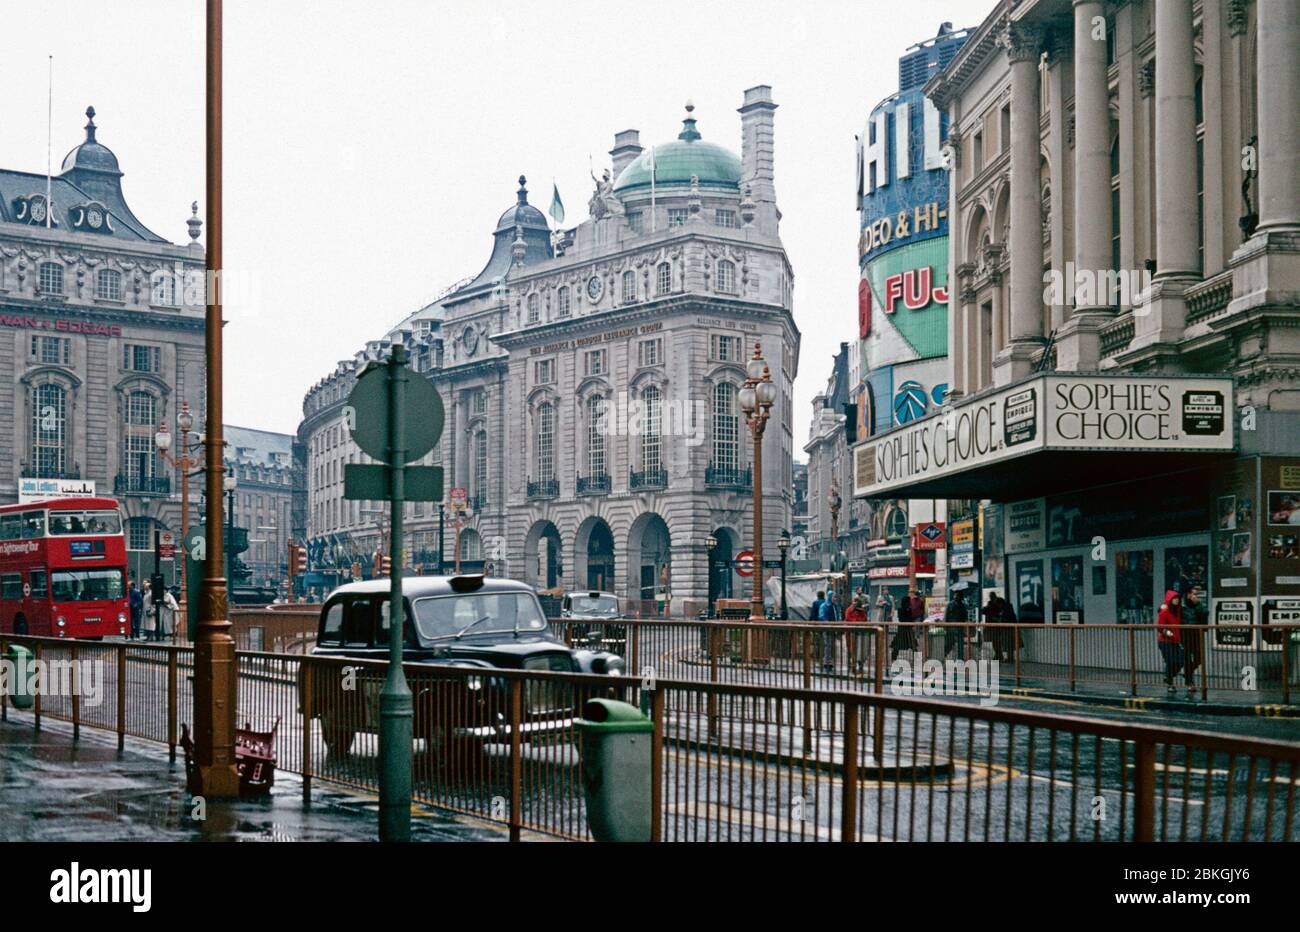 Piccadilly Circus, 10 avril 1983, Londres, Angleterre, Grande-Bretagne Banque D'Images